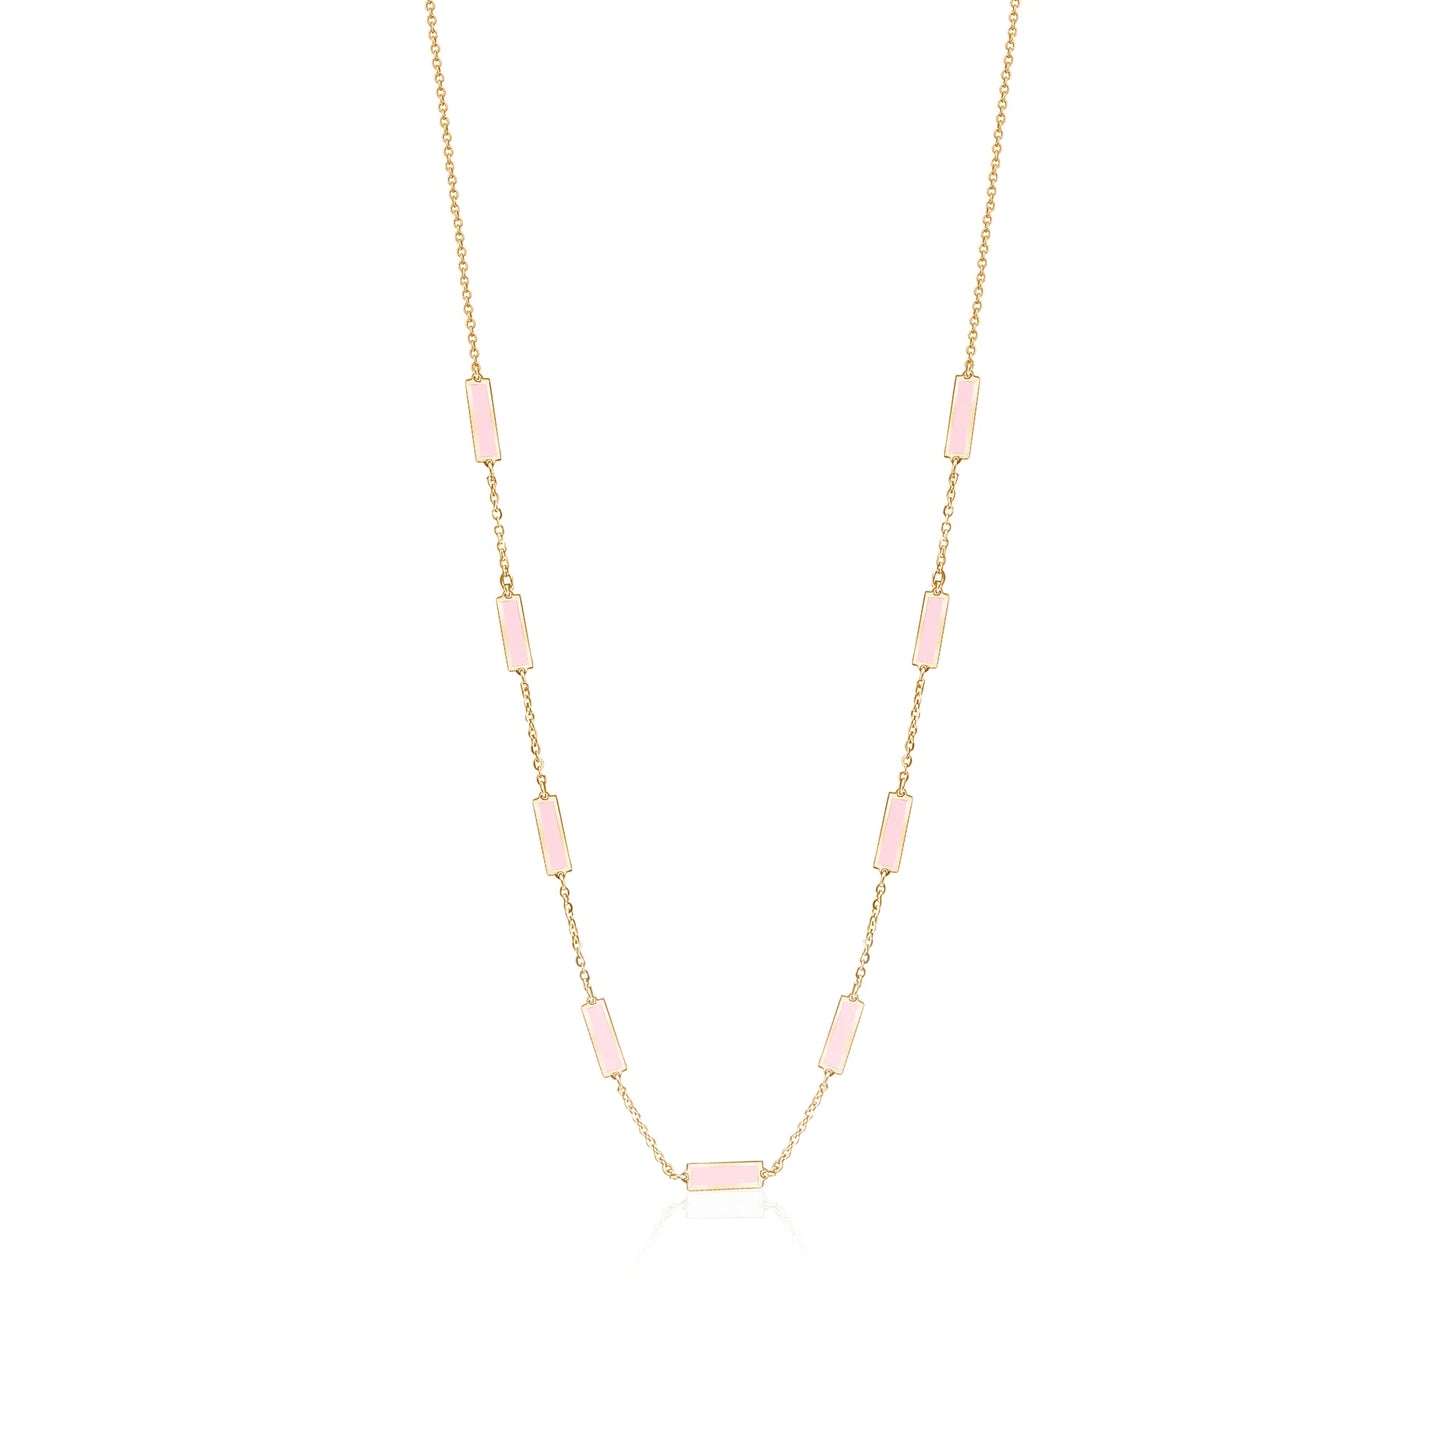 Colored Stone Bar & Chain Necklace